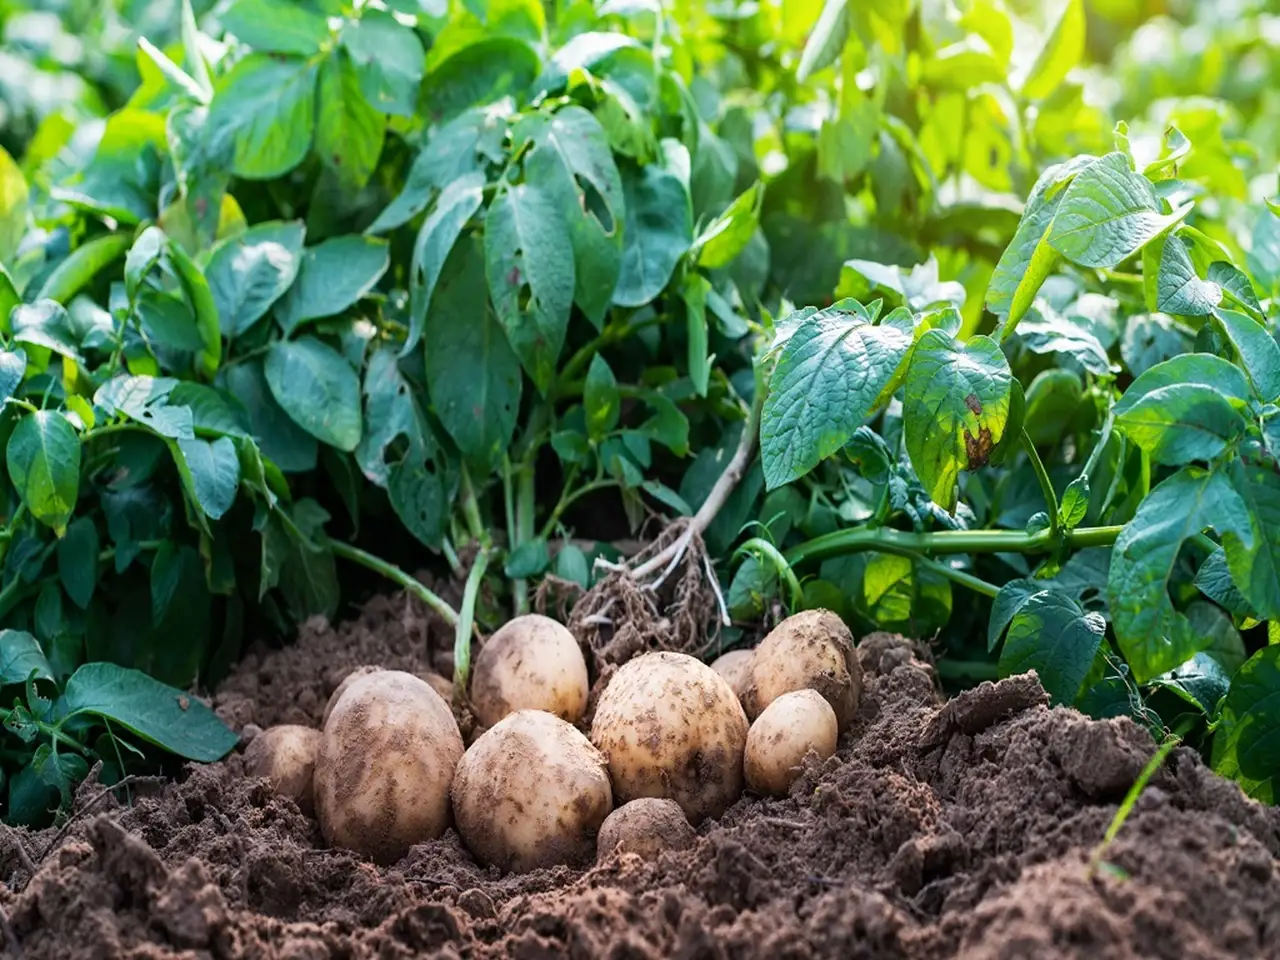 The best companion plants help potatoes by increasing growth and flavor or by repelling pests.